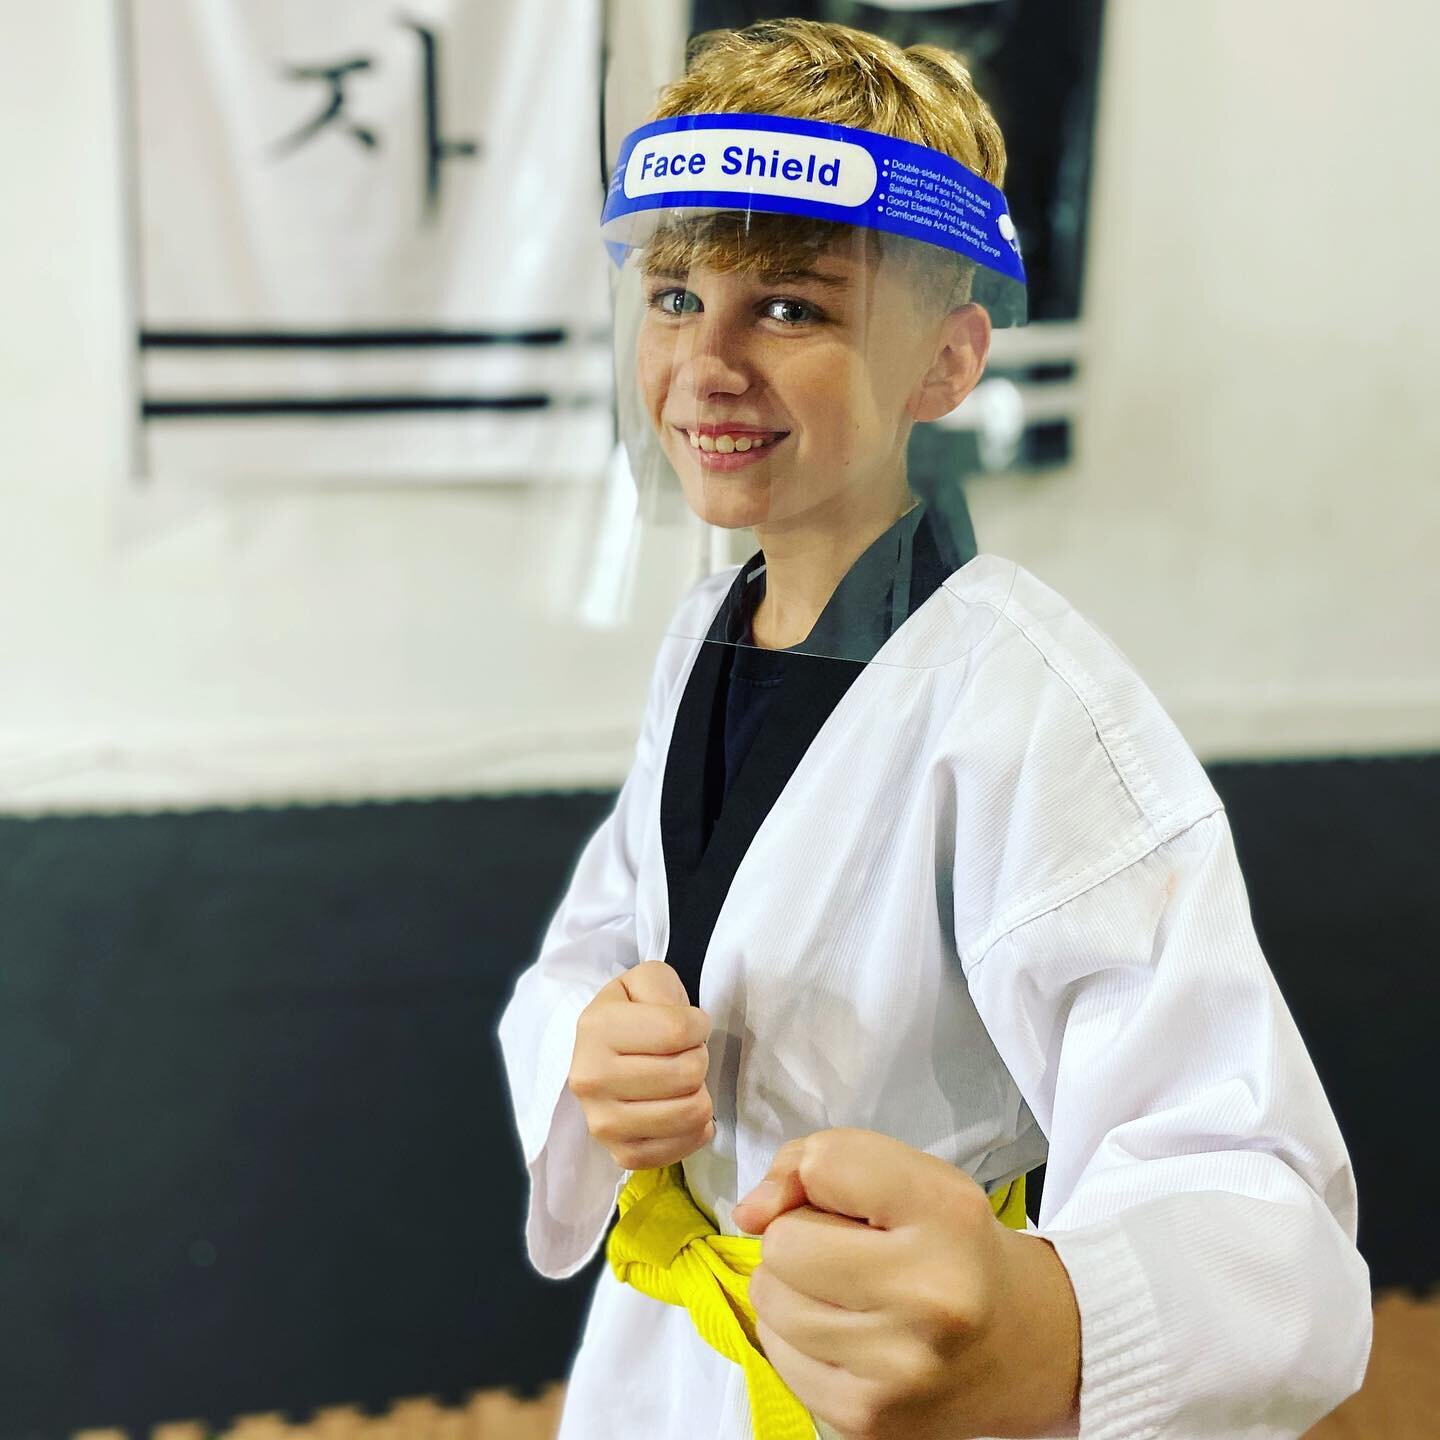 Get your little ninja back into action with martial arts classes. Monday & Wednesday 6-7pm. Review safety procedures below 🙌🏽💪🏽
.
.
.
Face shields during training. Temperature checks at the door and hand washing upon arrival. Students need to bri